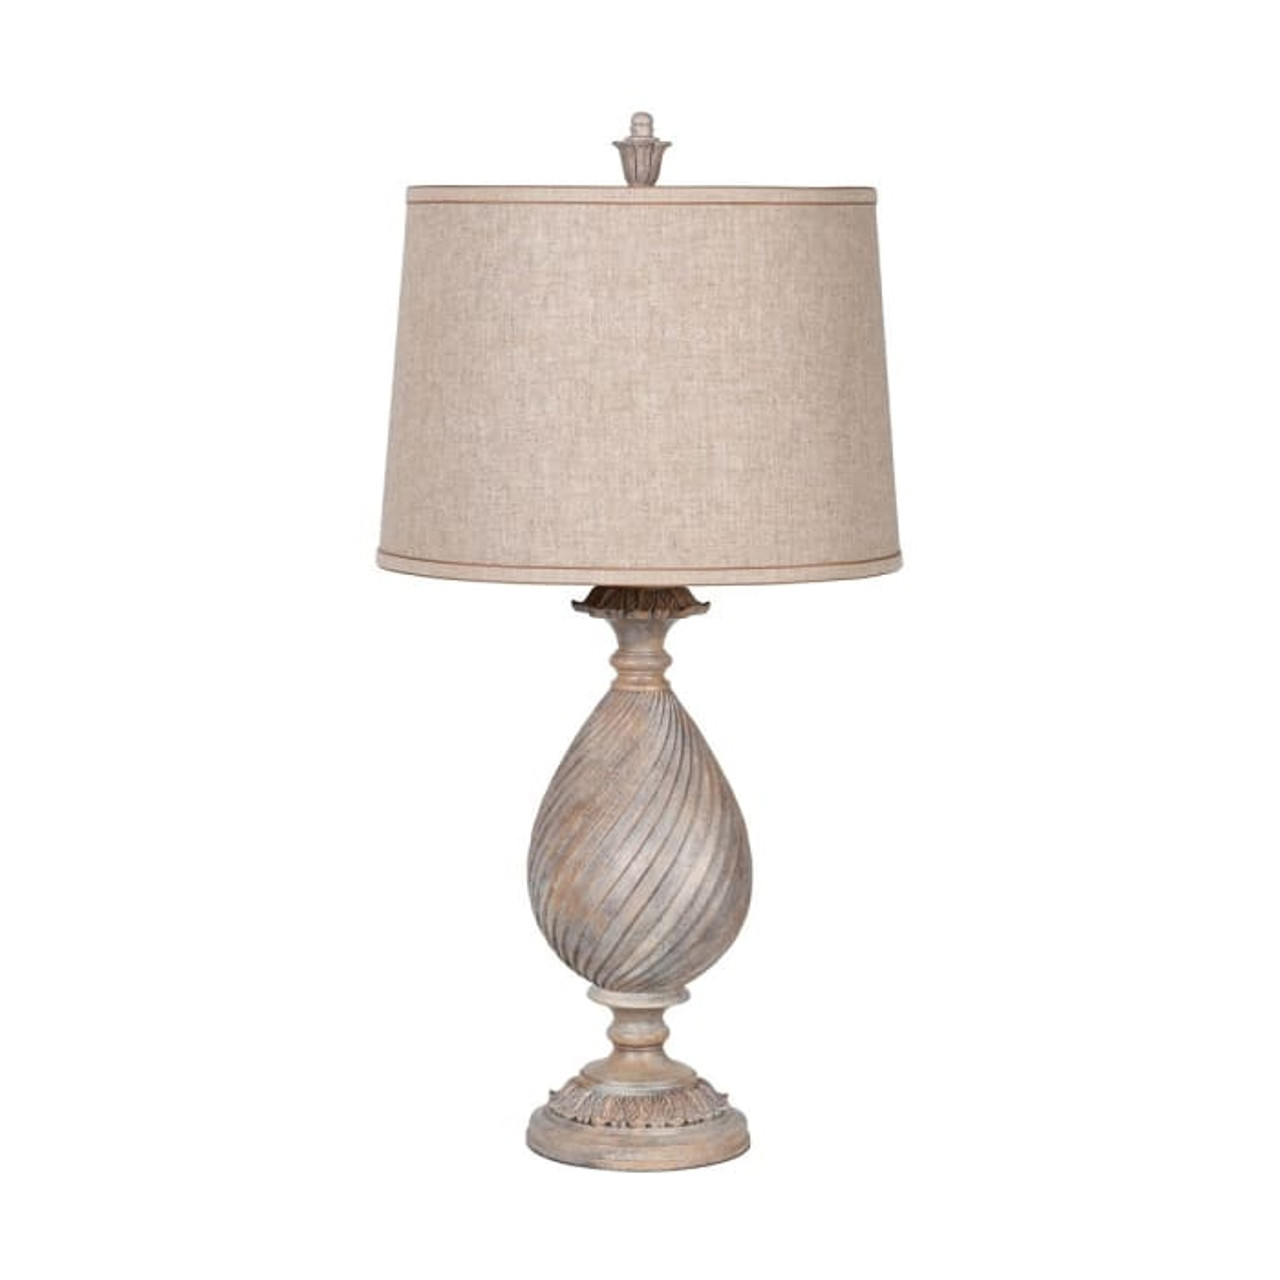 Sutton Table Lamp with Linen Shade